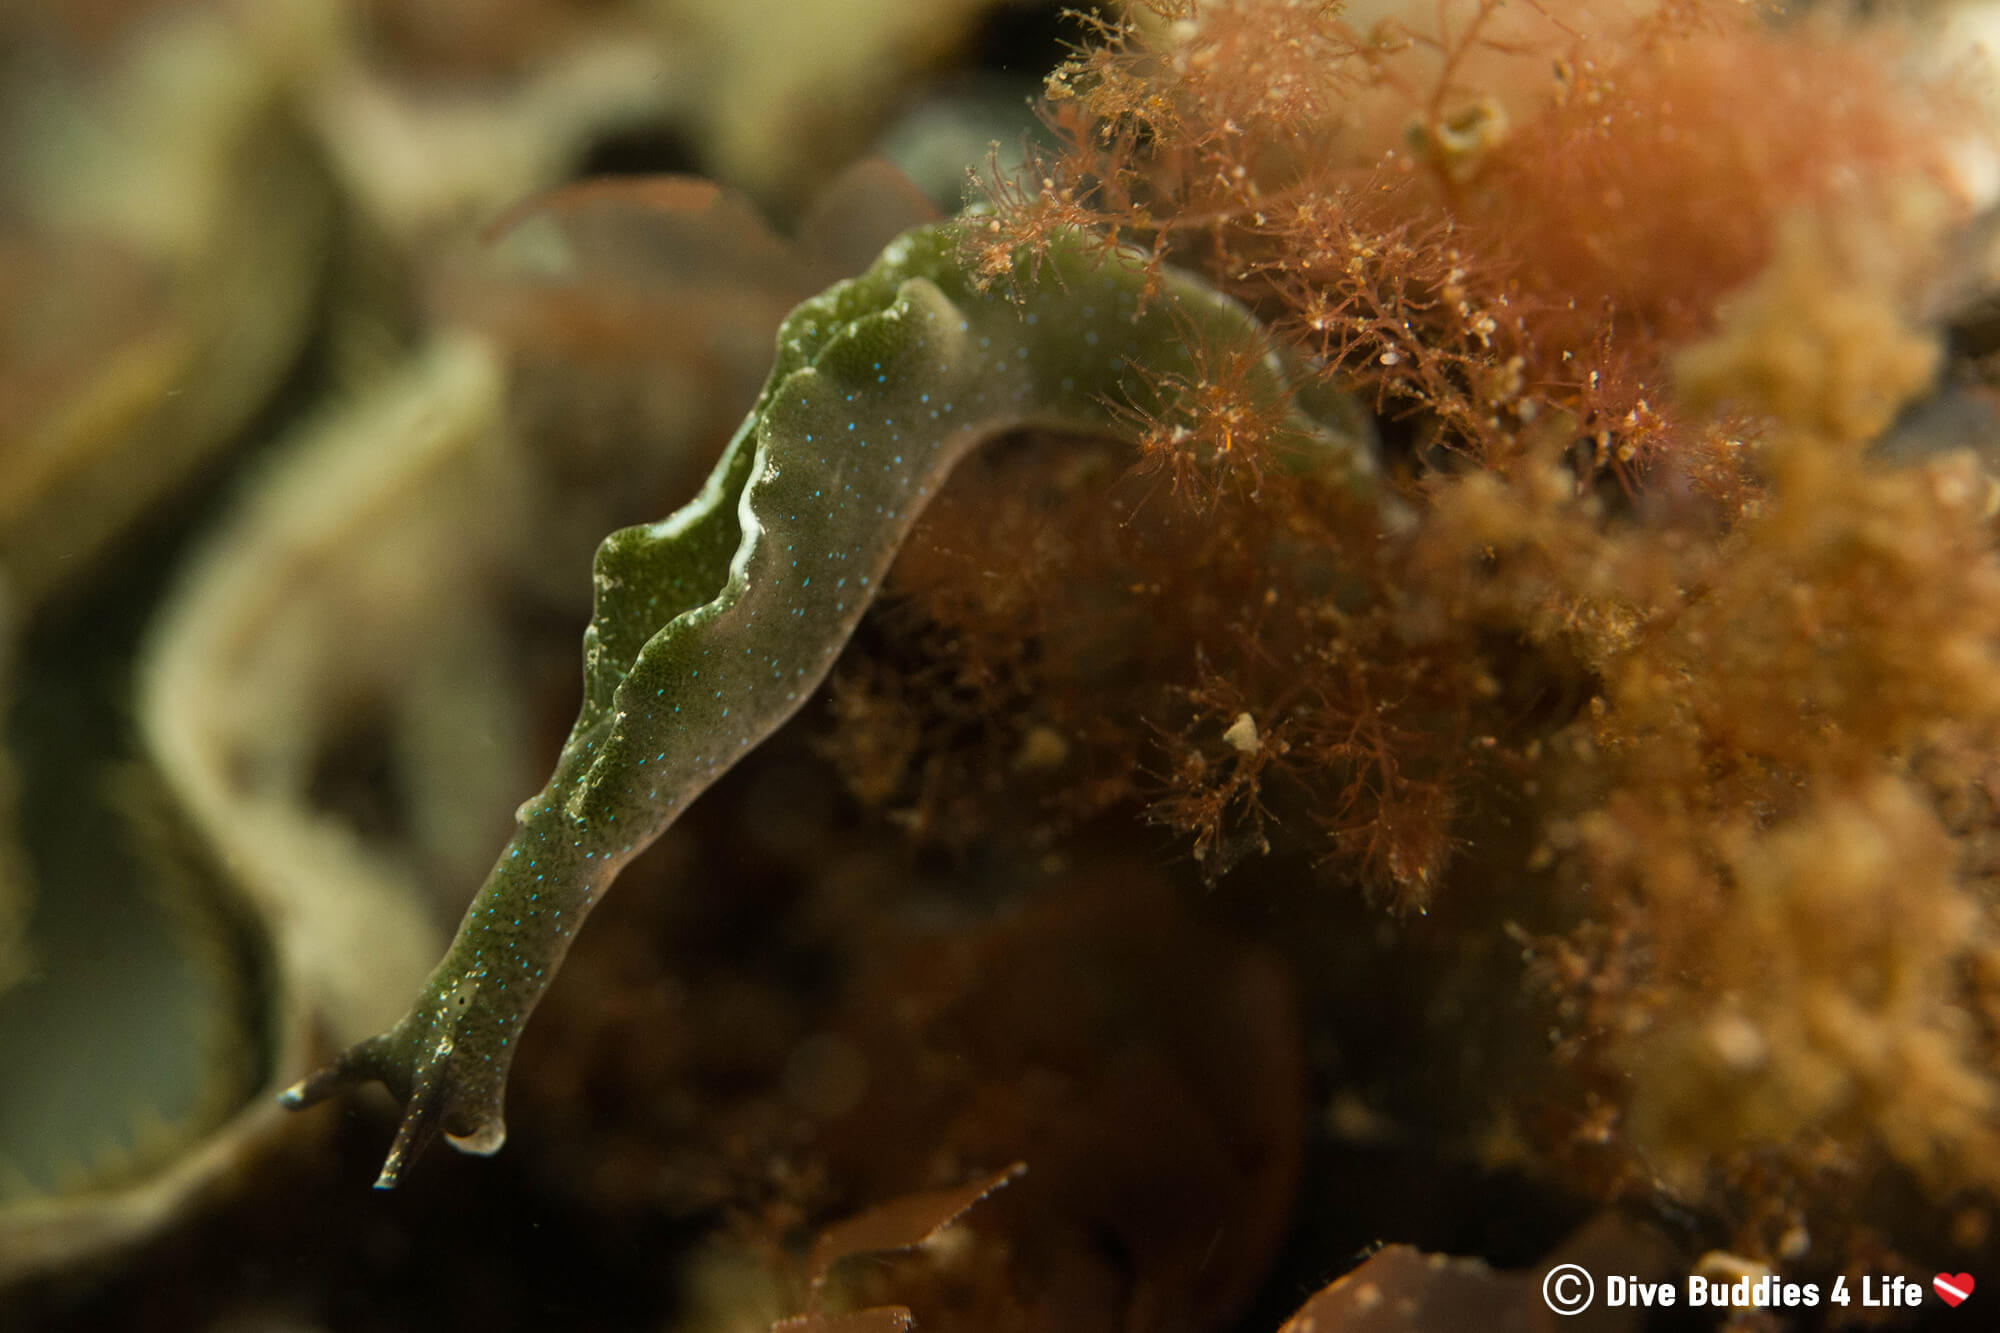 Watching A Green Nudibranch Extending His Body From A Plant While Scuba Diving In A Saltwater Lake In The Netherlands